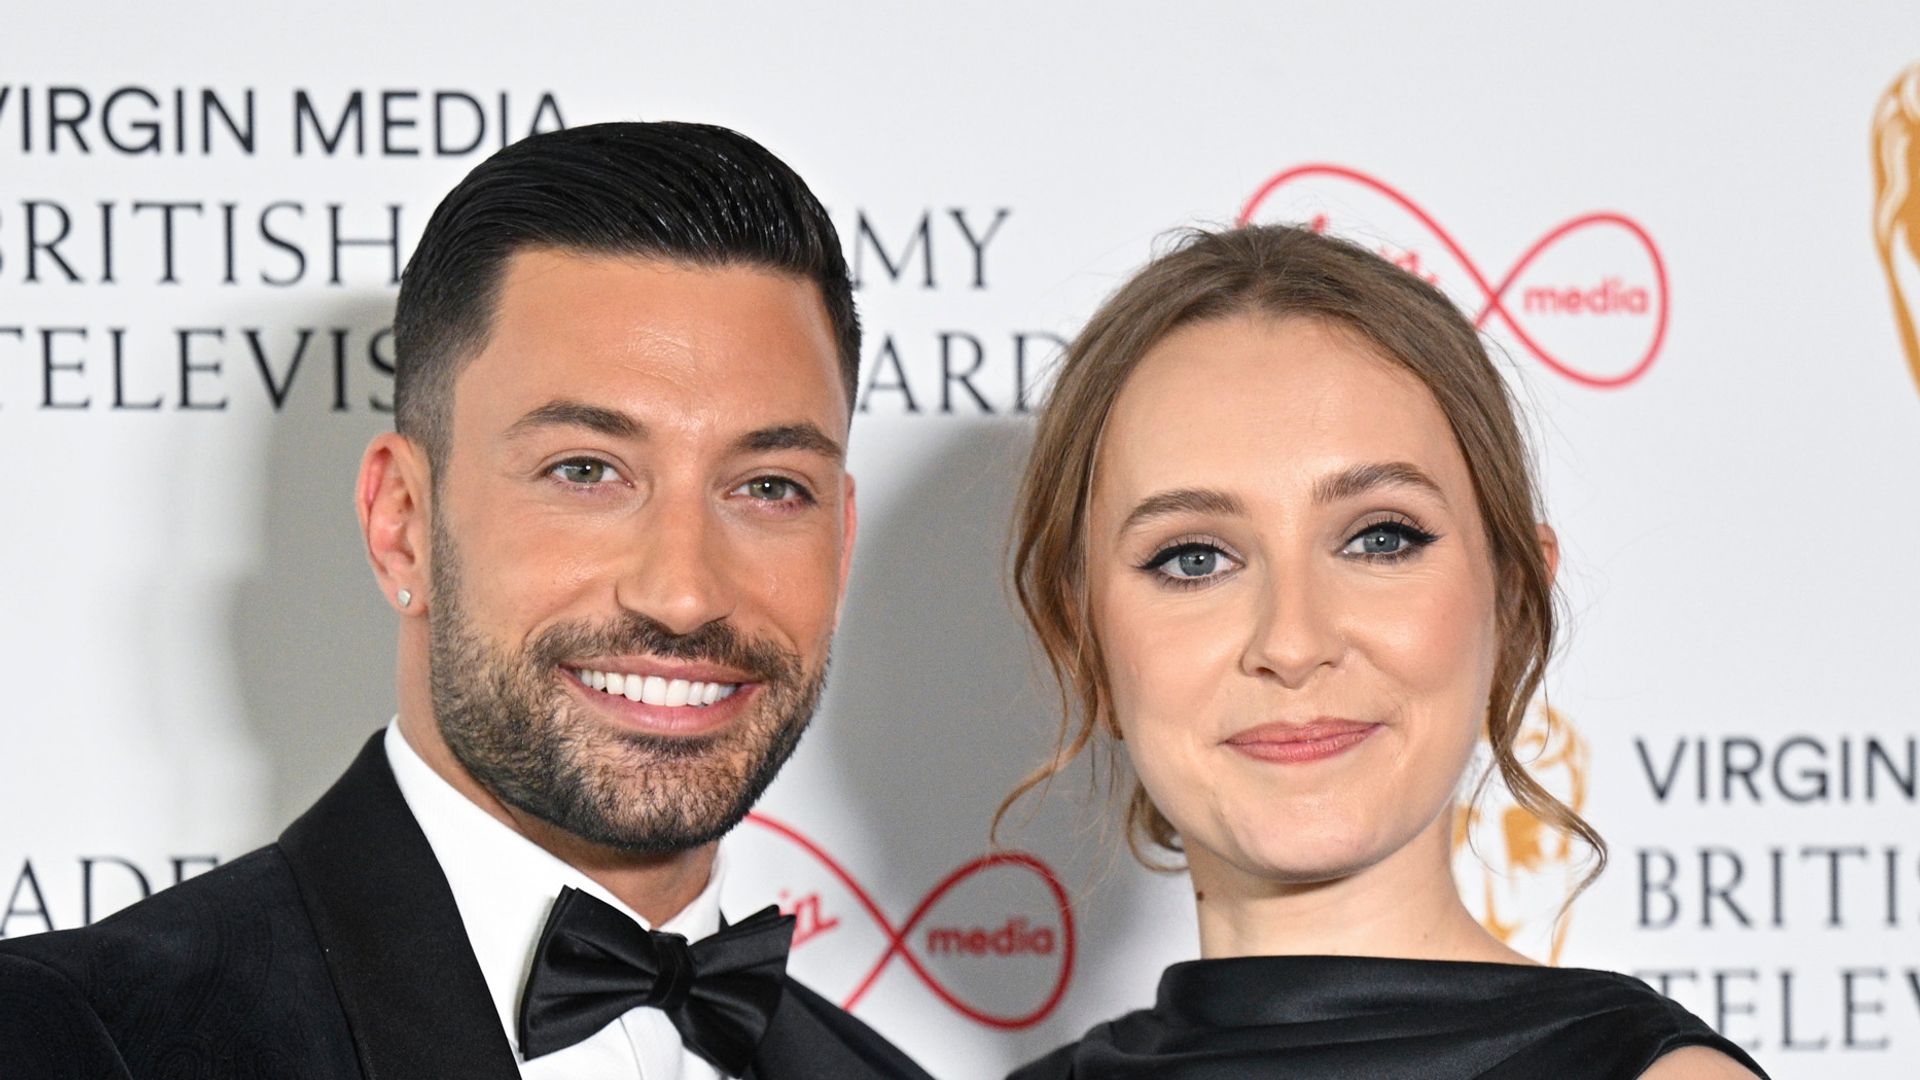 Giovanni Pernice and Rose Ayling-Ellis on red carpet